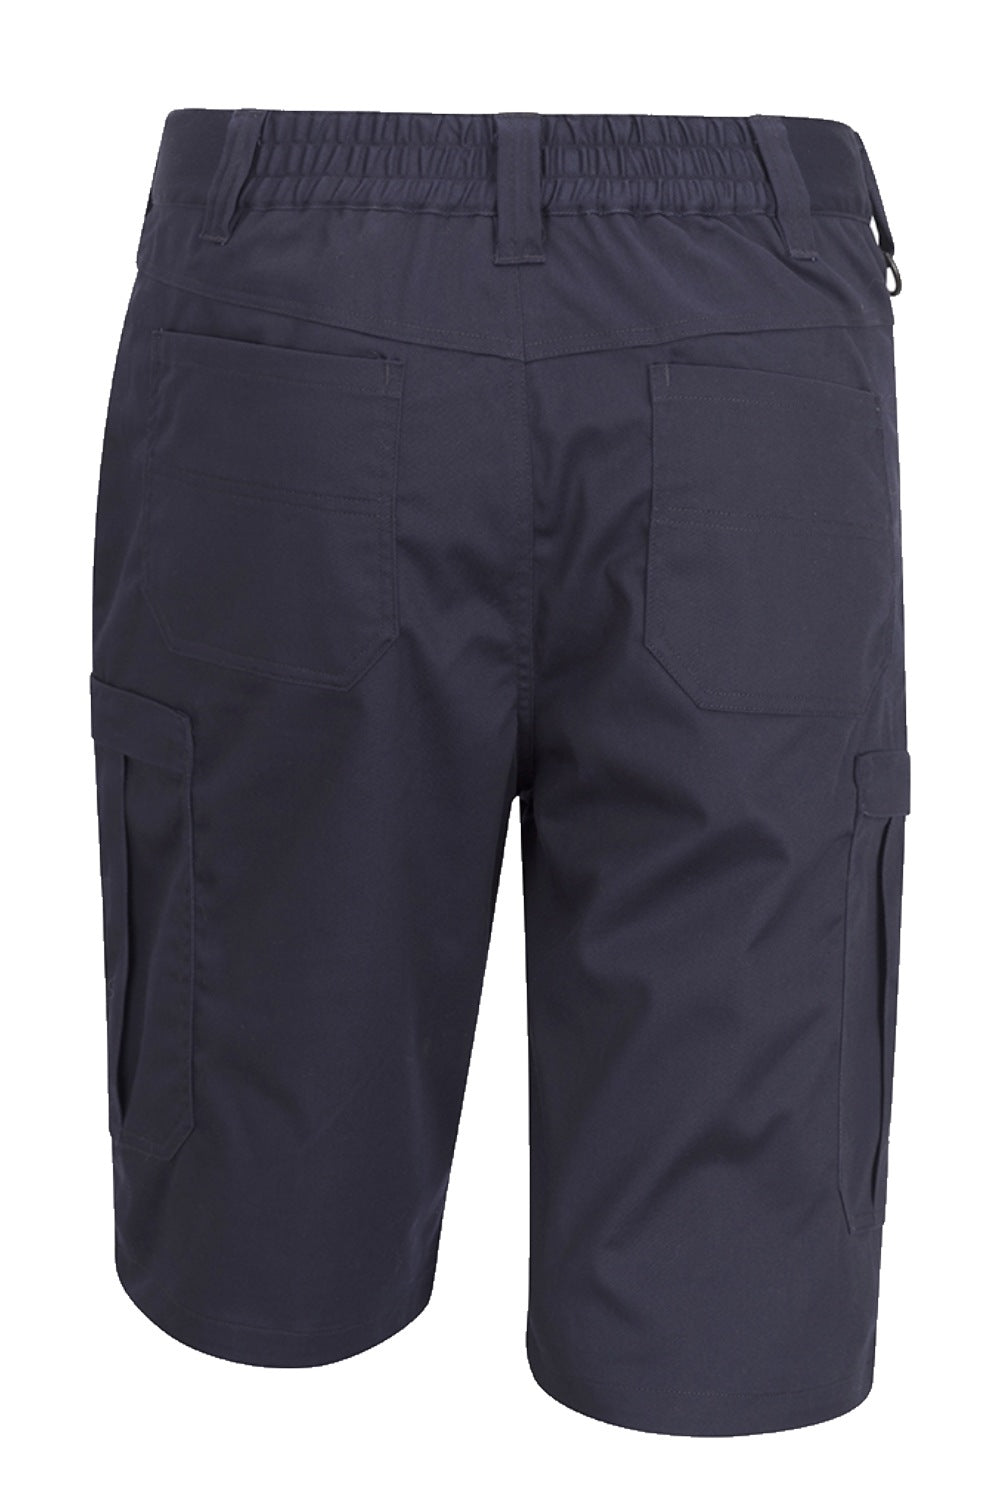 Hoggs Of Fife WorkHogg Utility Shorts in Navy - Back